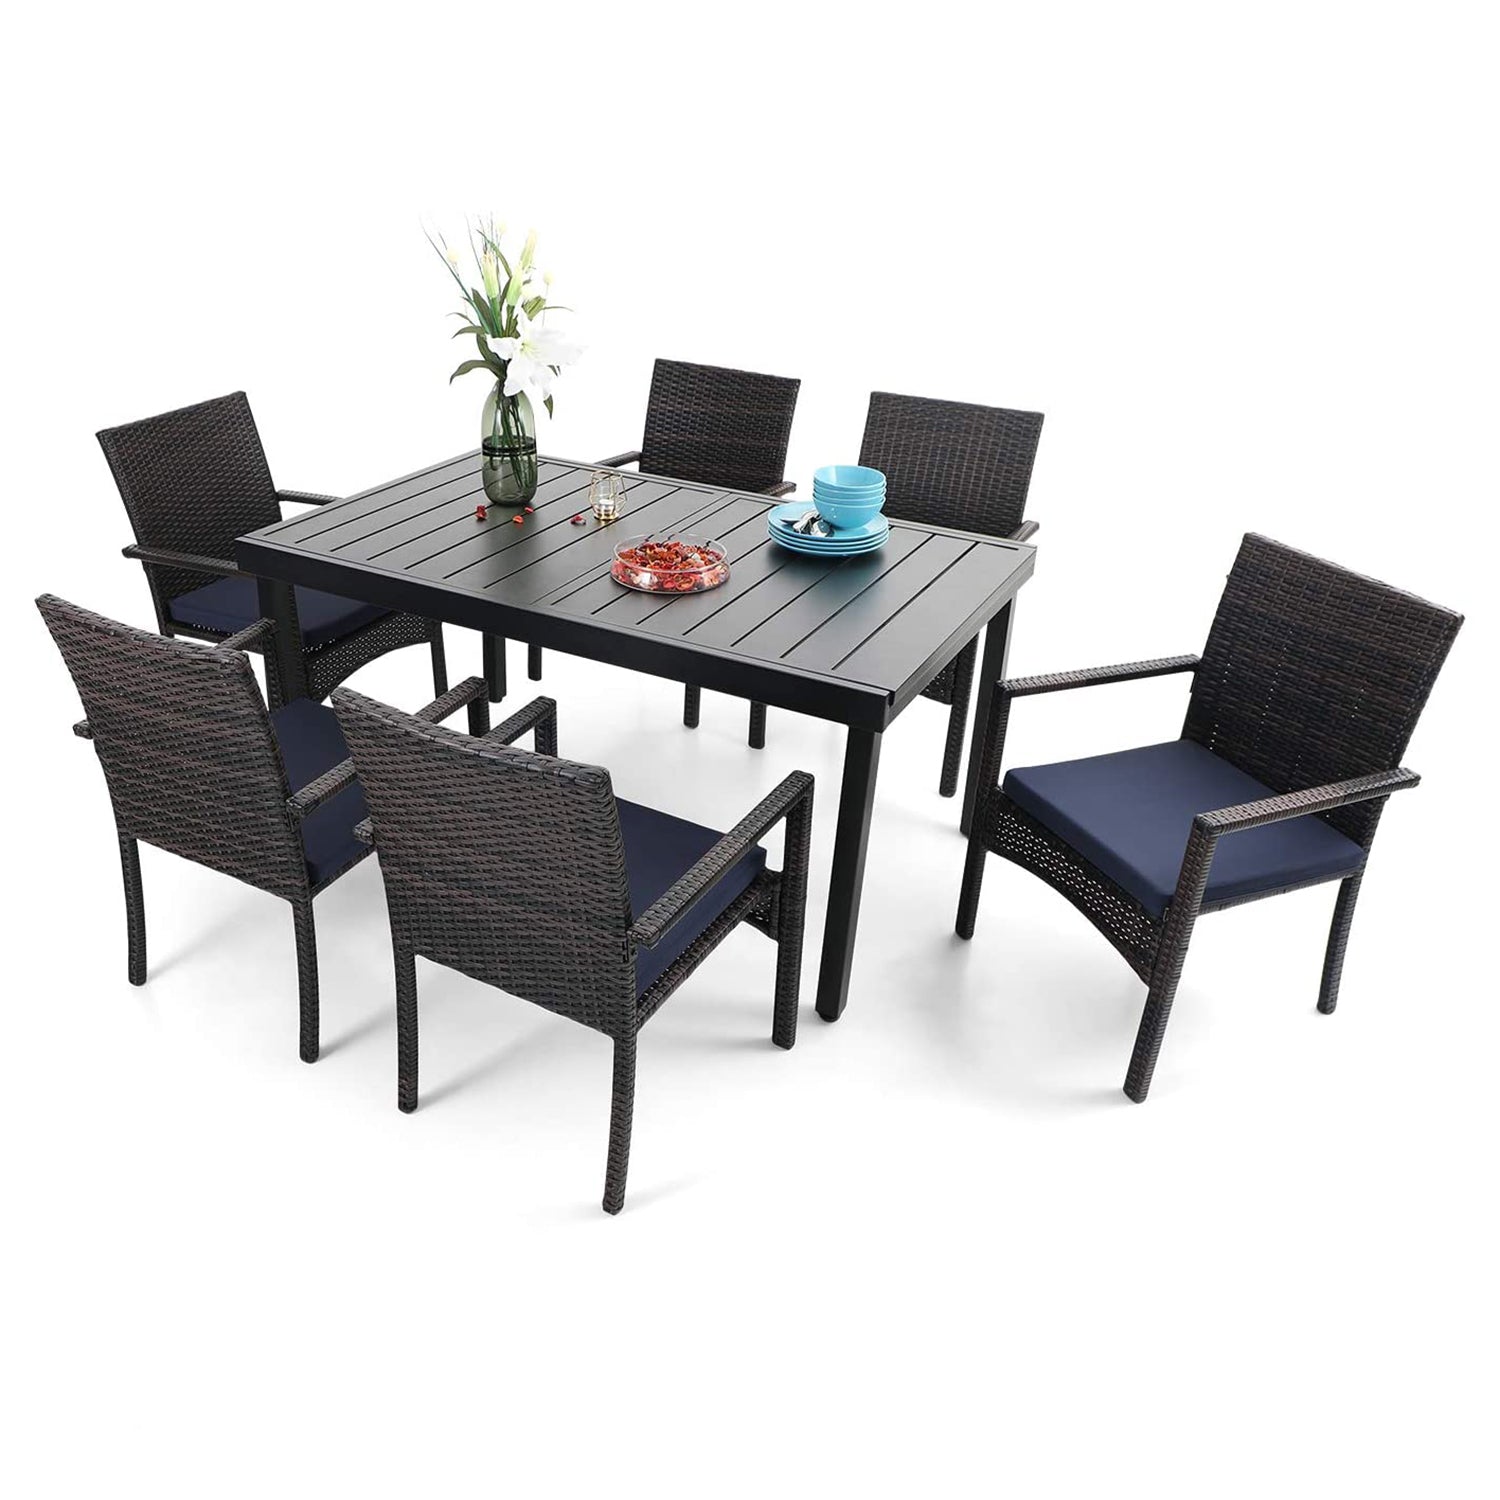 PHI VILLA Rattan Wicker Cushioned Dining Chairs Set with Extendable Table